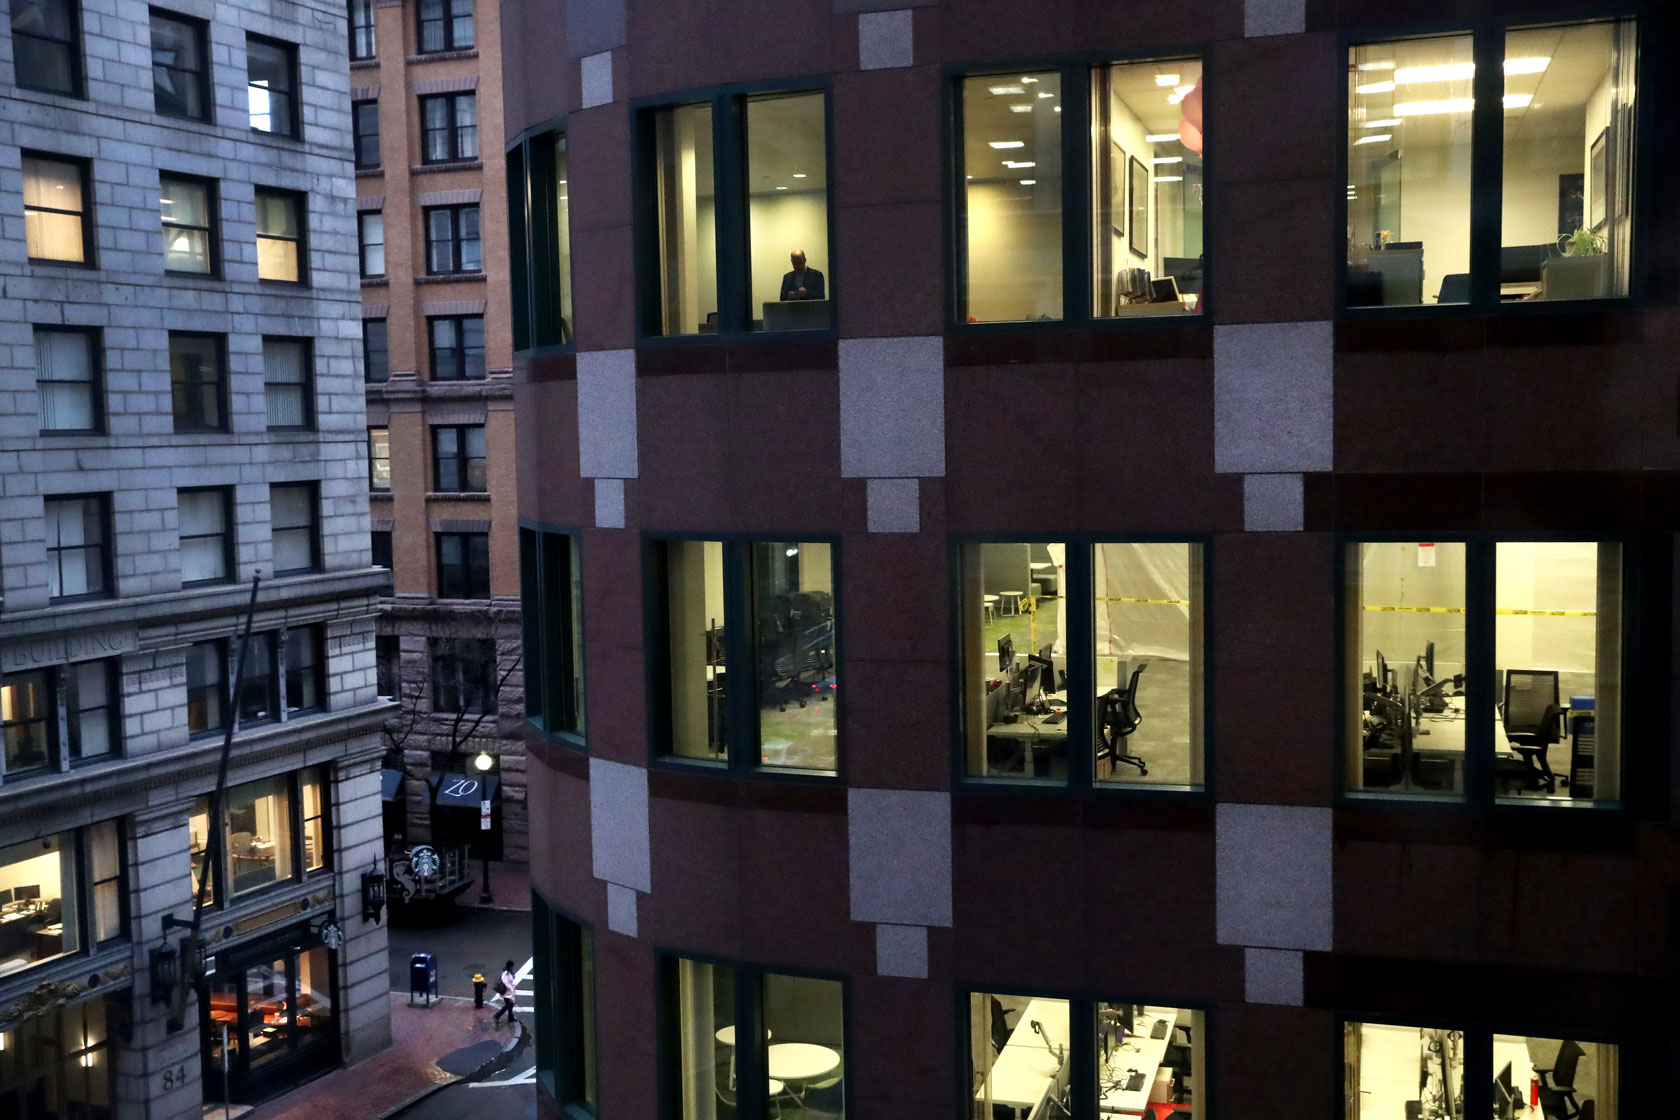 Photo shows a nearly empty office building with windows illuminated and one or two people present inside.